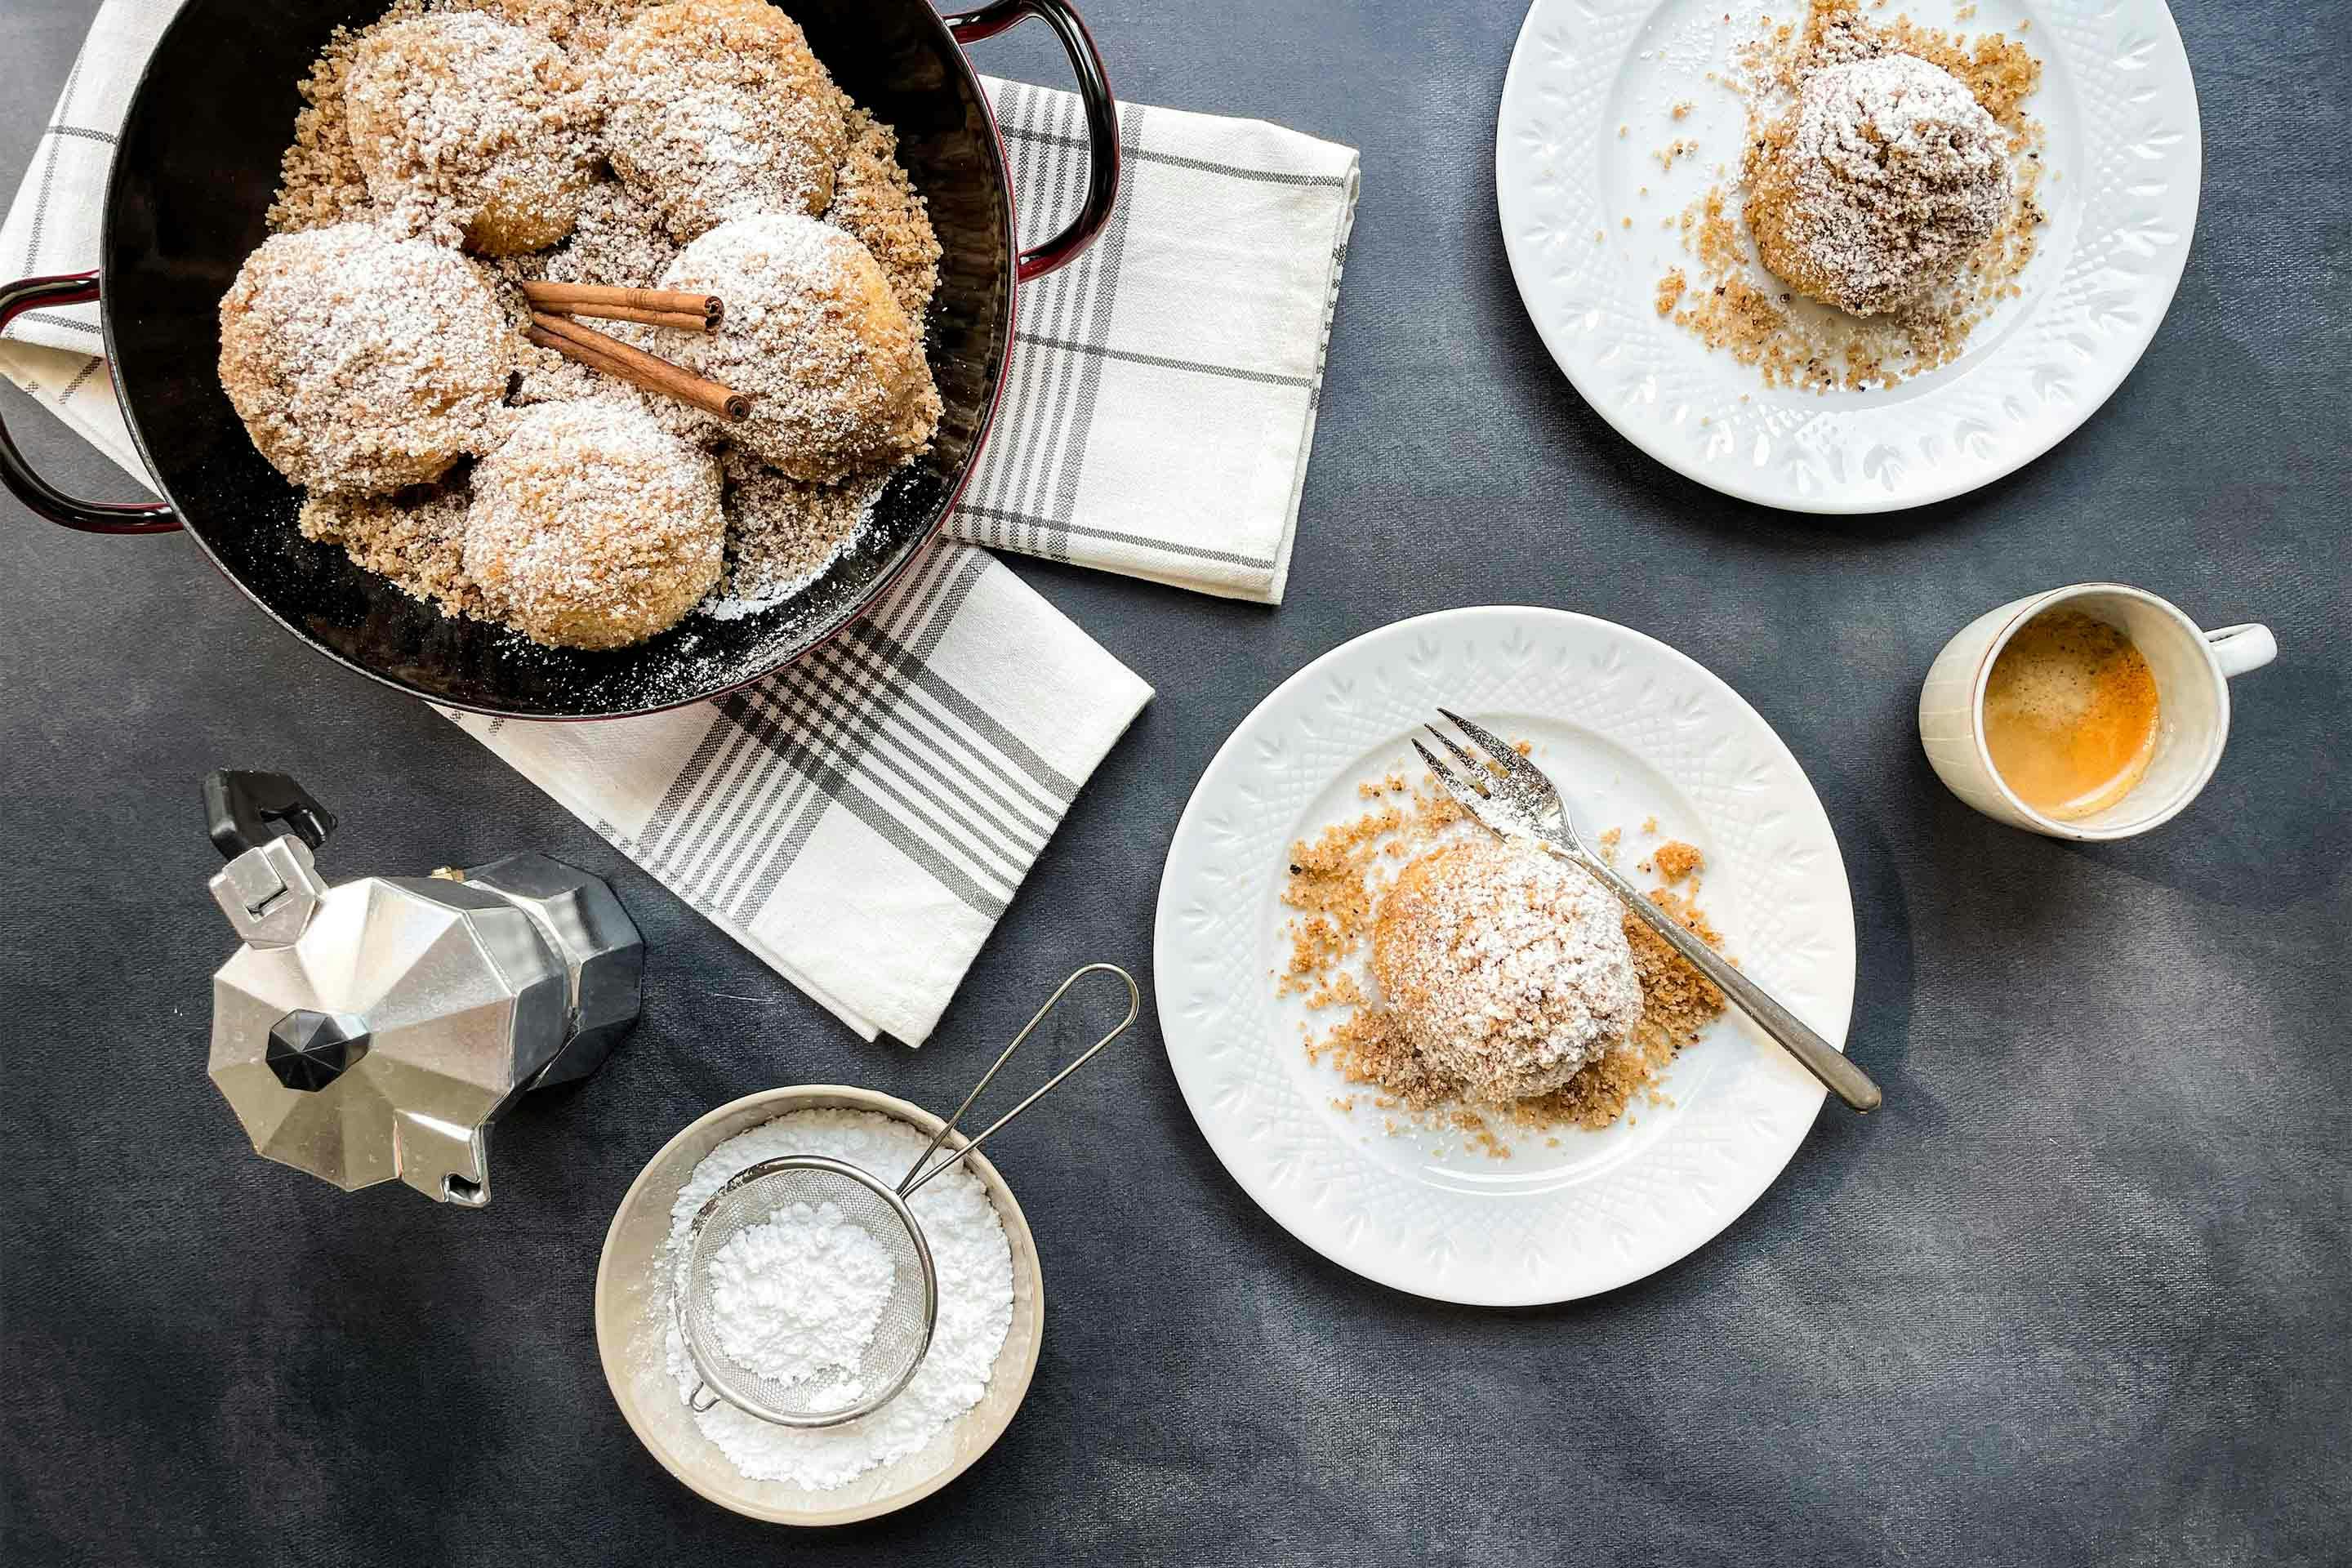 The summer classic with a Kotányi twist: apricot dumplings with cinnamon butter crumbs.